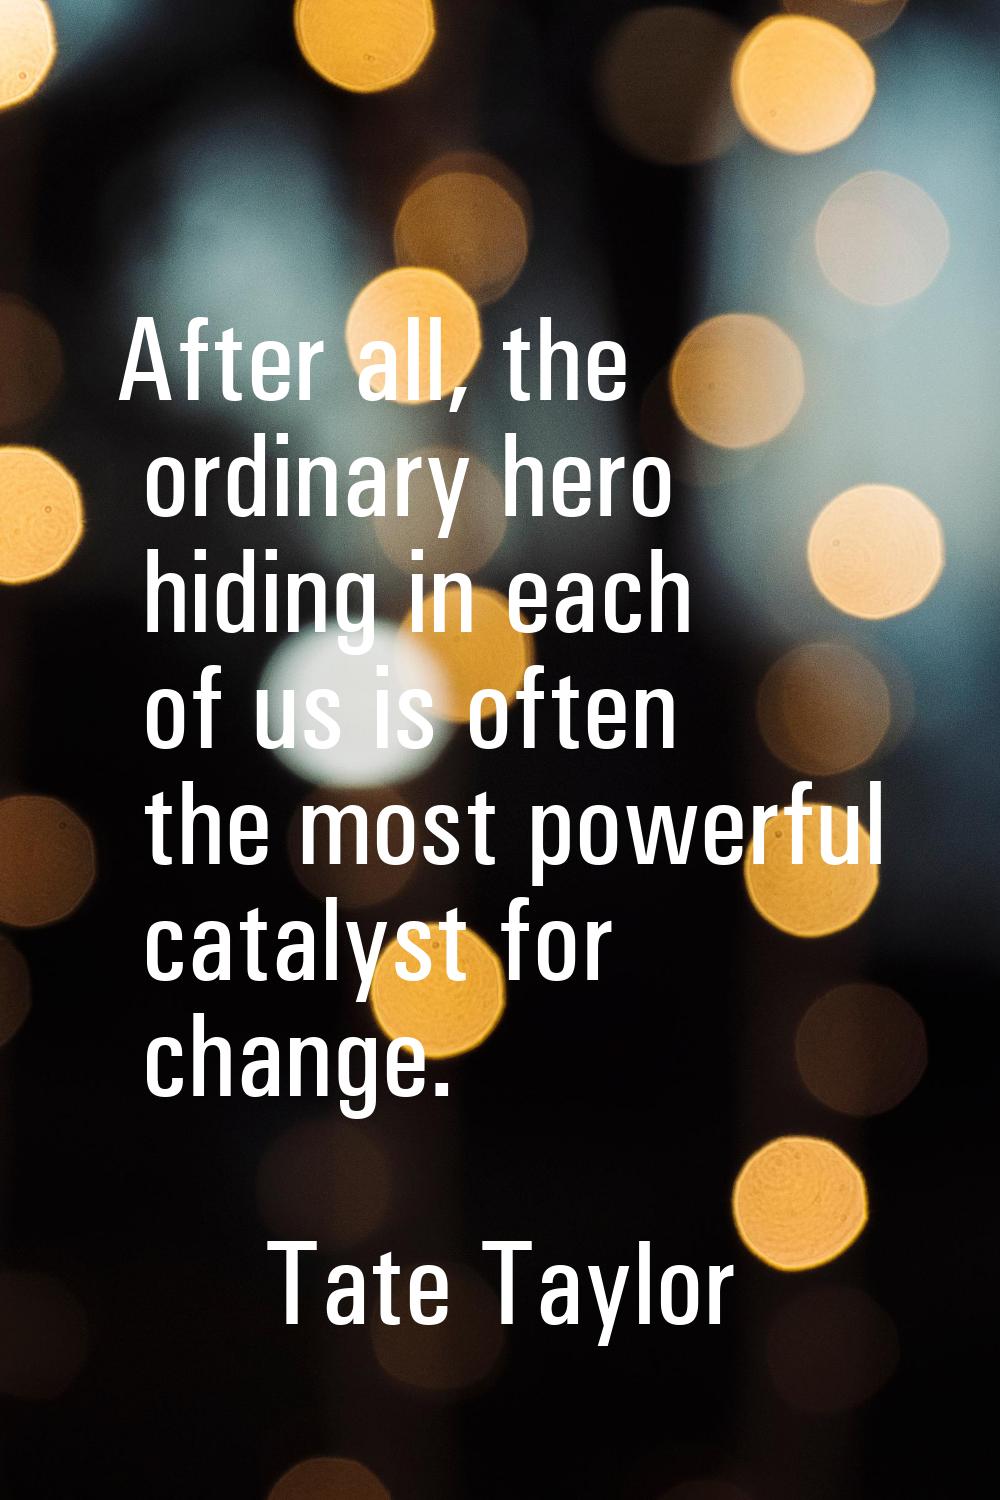 After all, the ordinary hero hiding in each of us is often the most powerful catalyst for change.